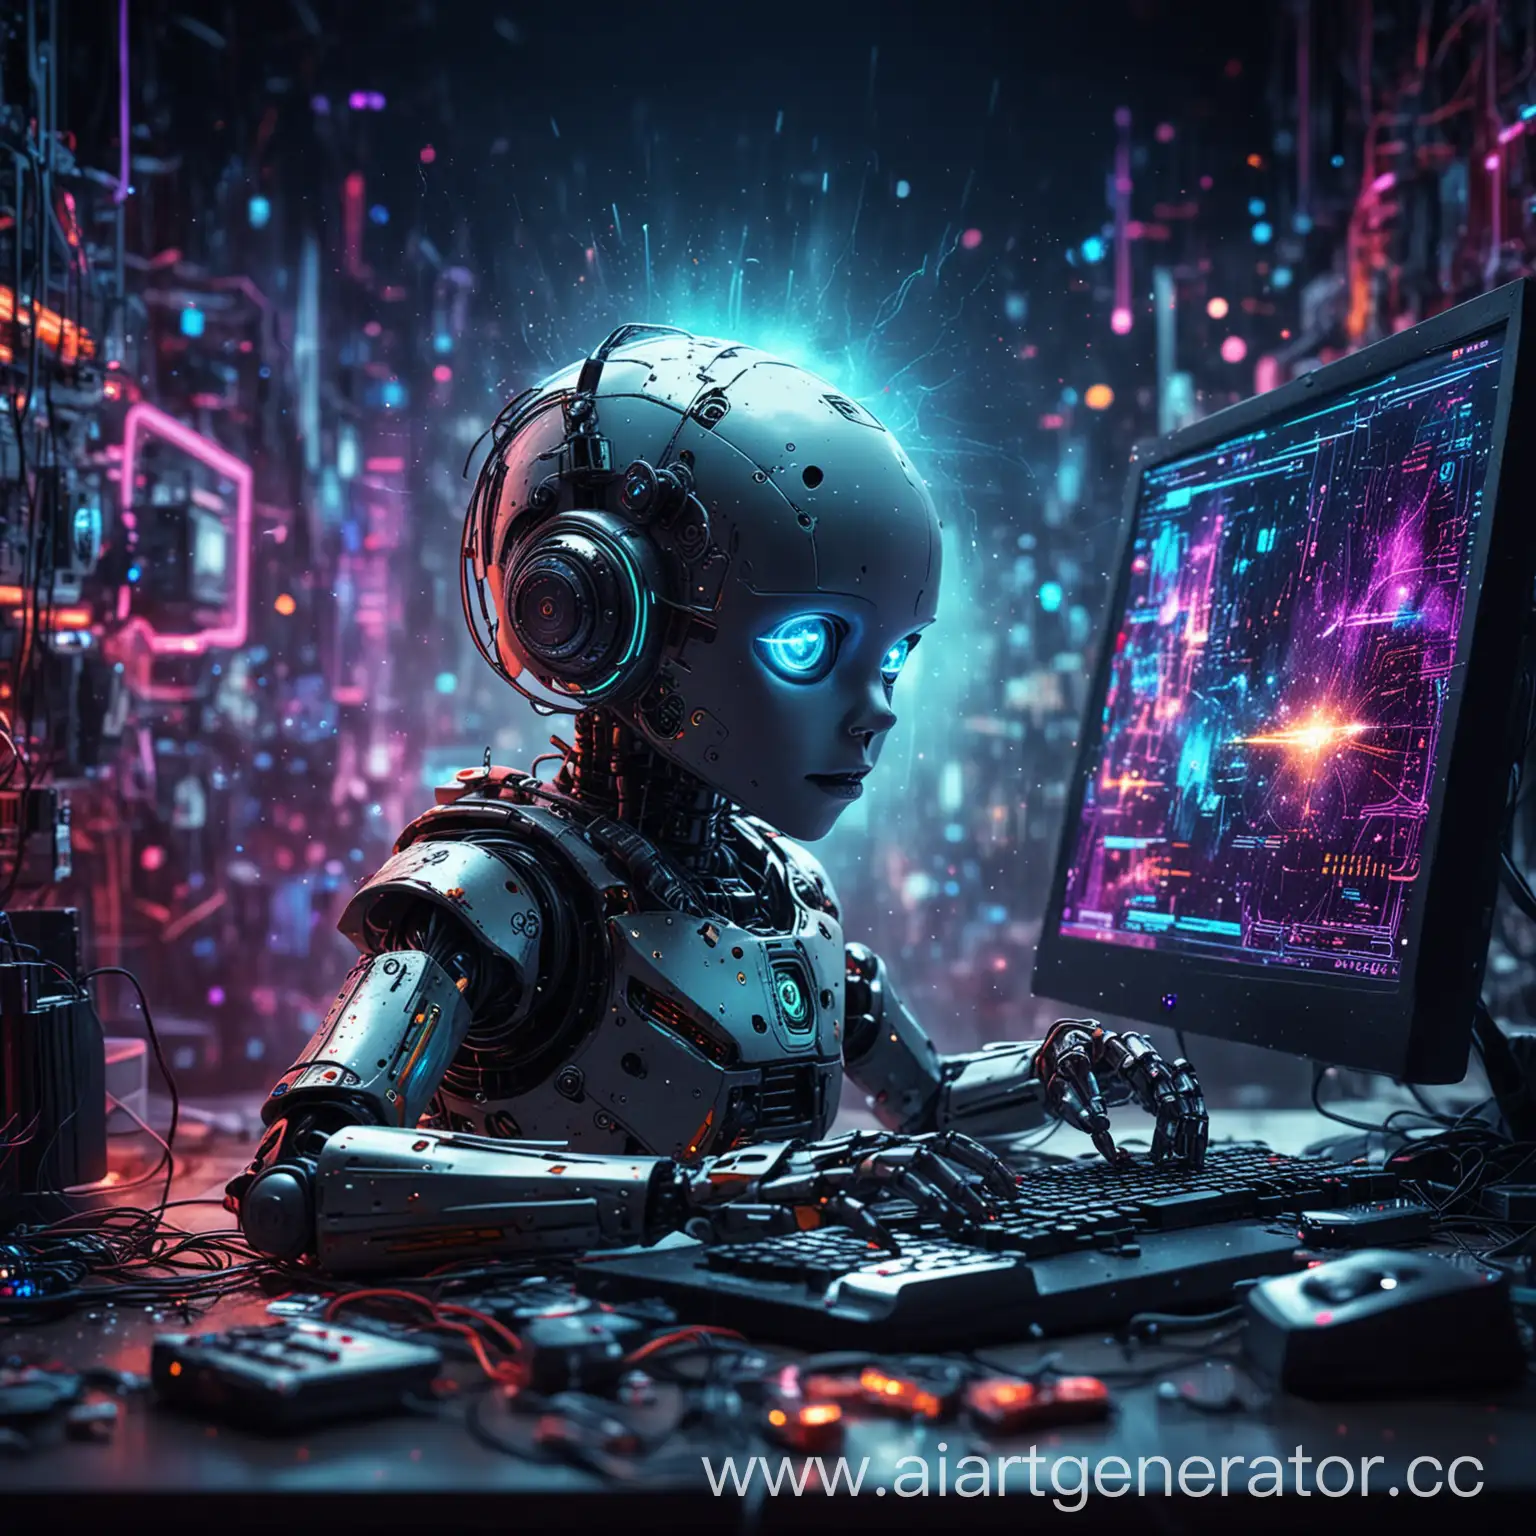 Cyberpunk-Robot-Working-at-Computer-with-Cosmic-Chaos-Background